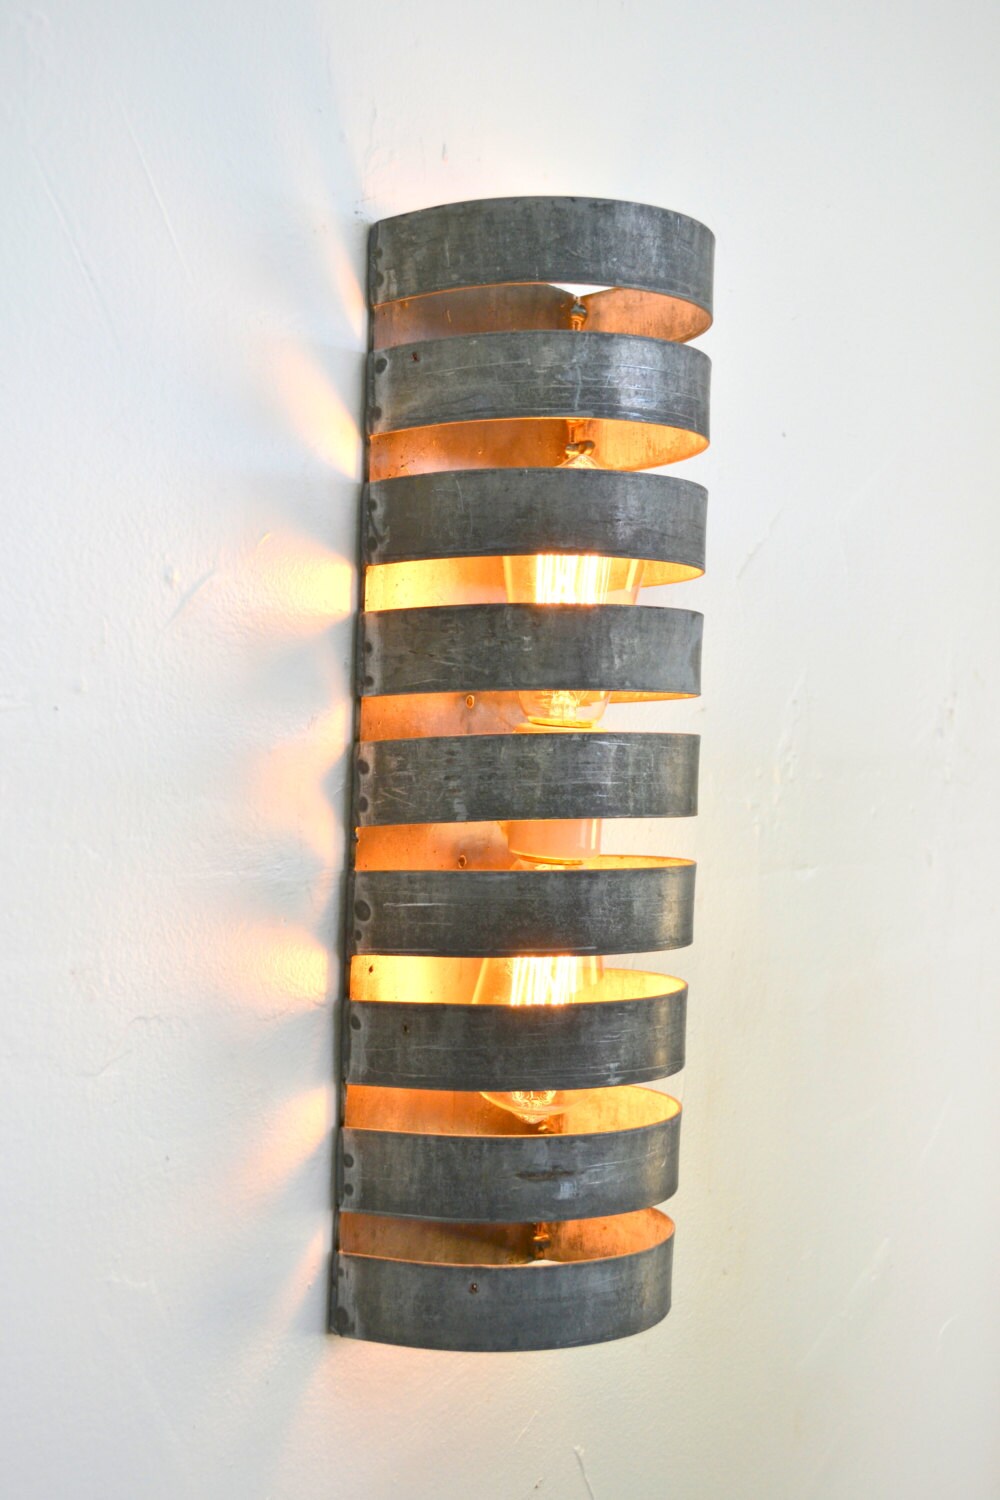 Wine Barrel Wall Sconce - Kundali - Made from retired California wine barrel rings. 100% Recycled!